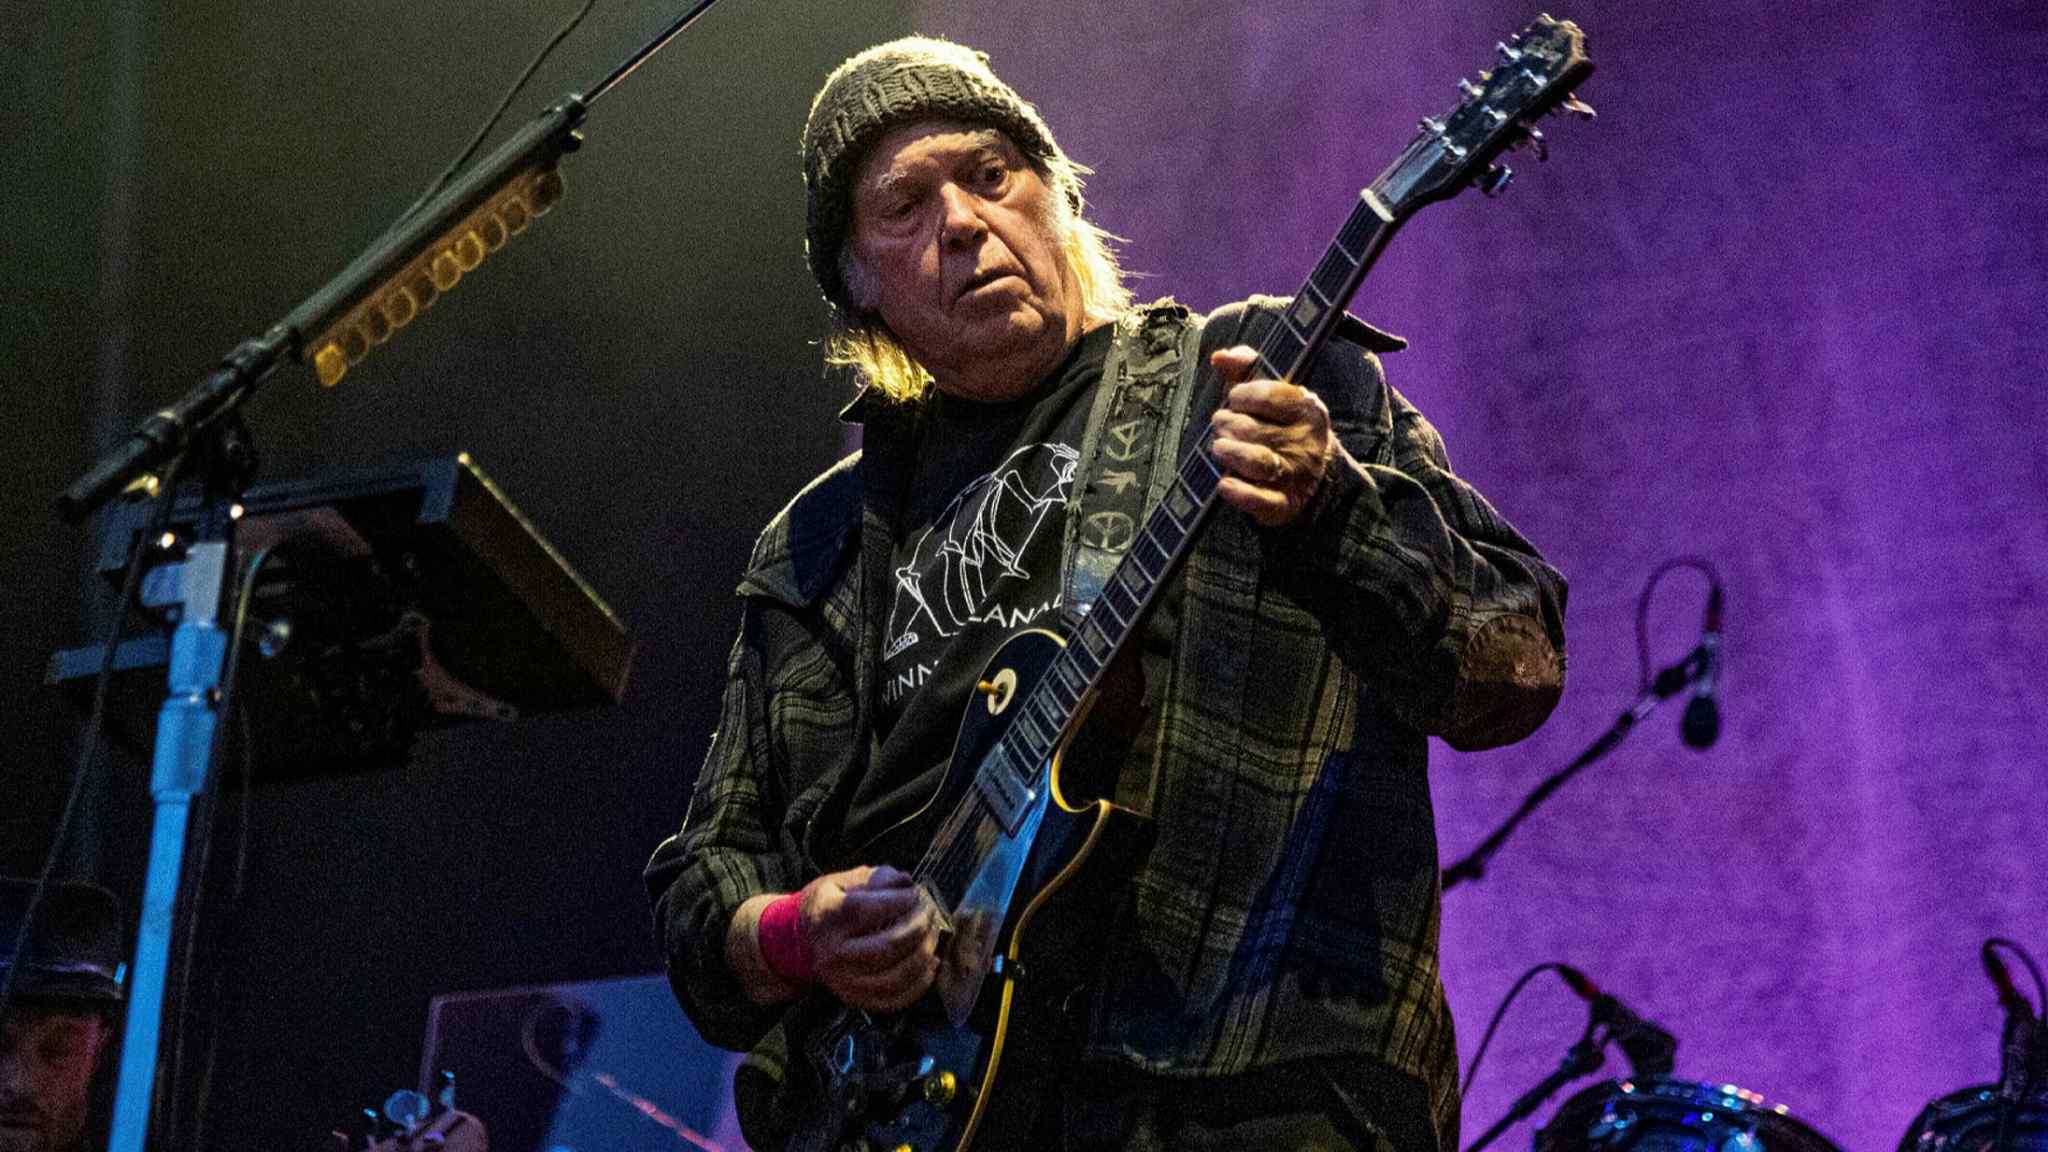 Neil Young threatens to pull songs from Spotify over Joe Rogan podcast